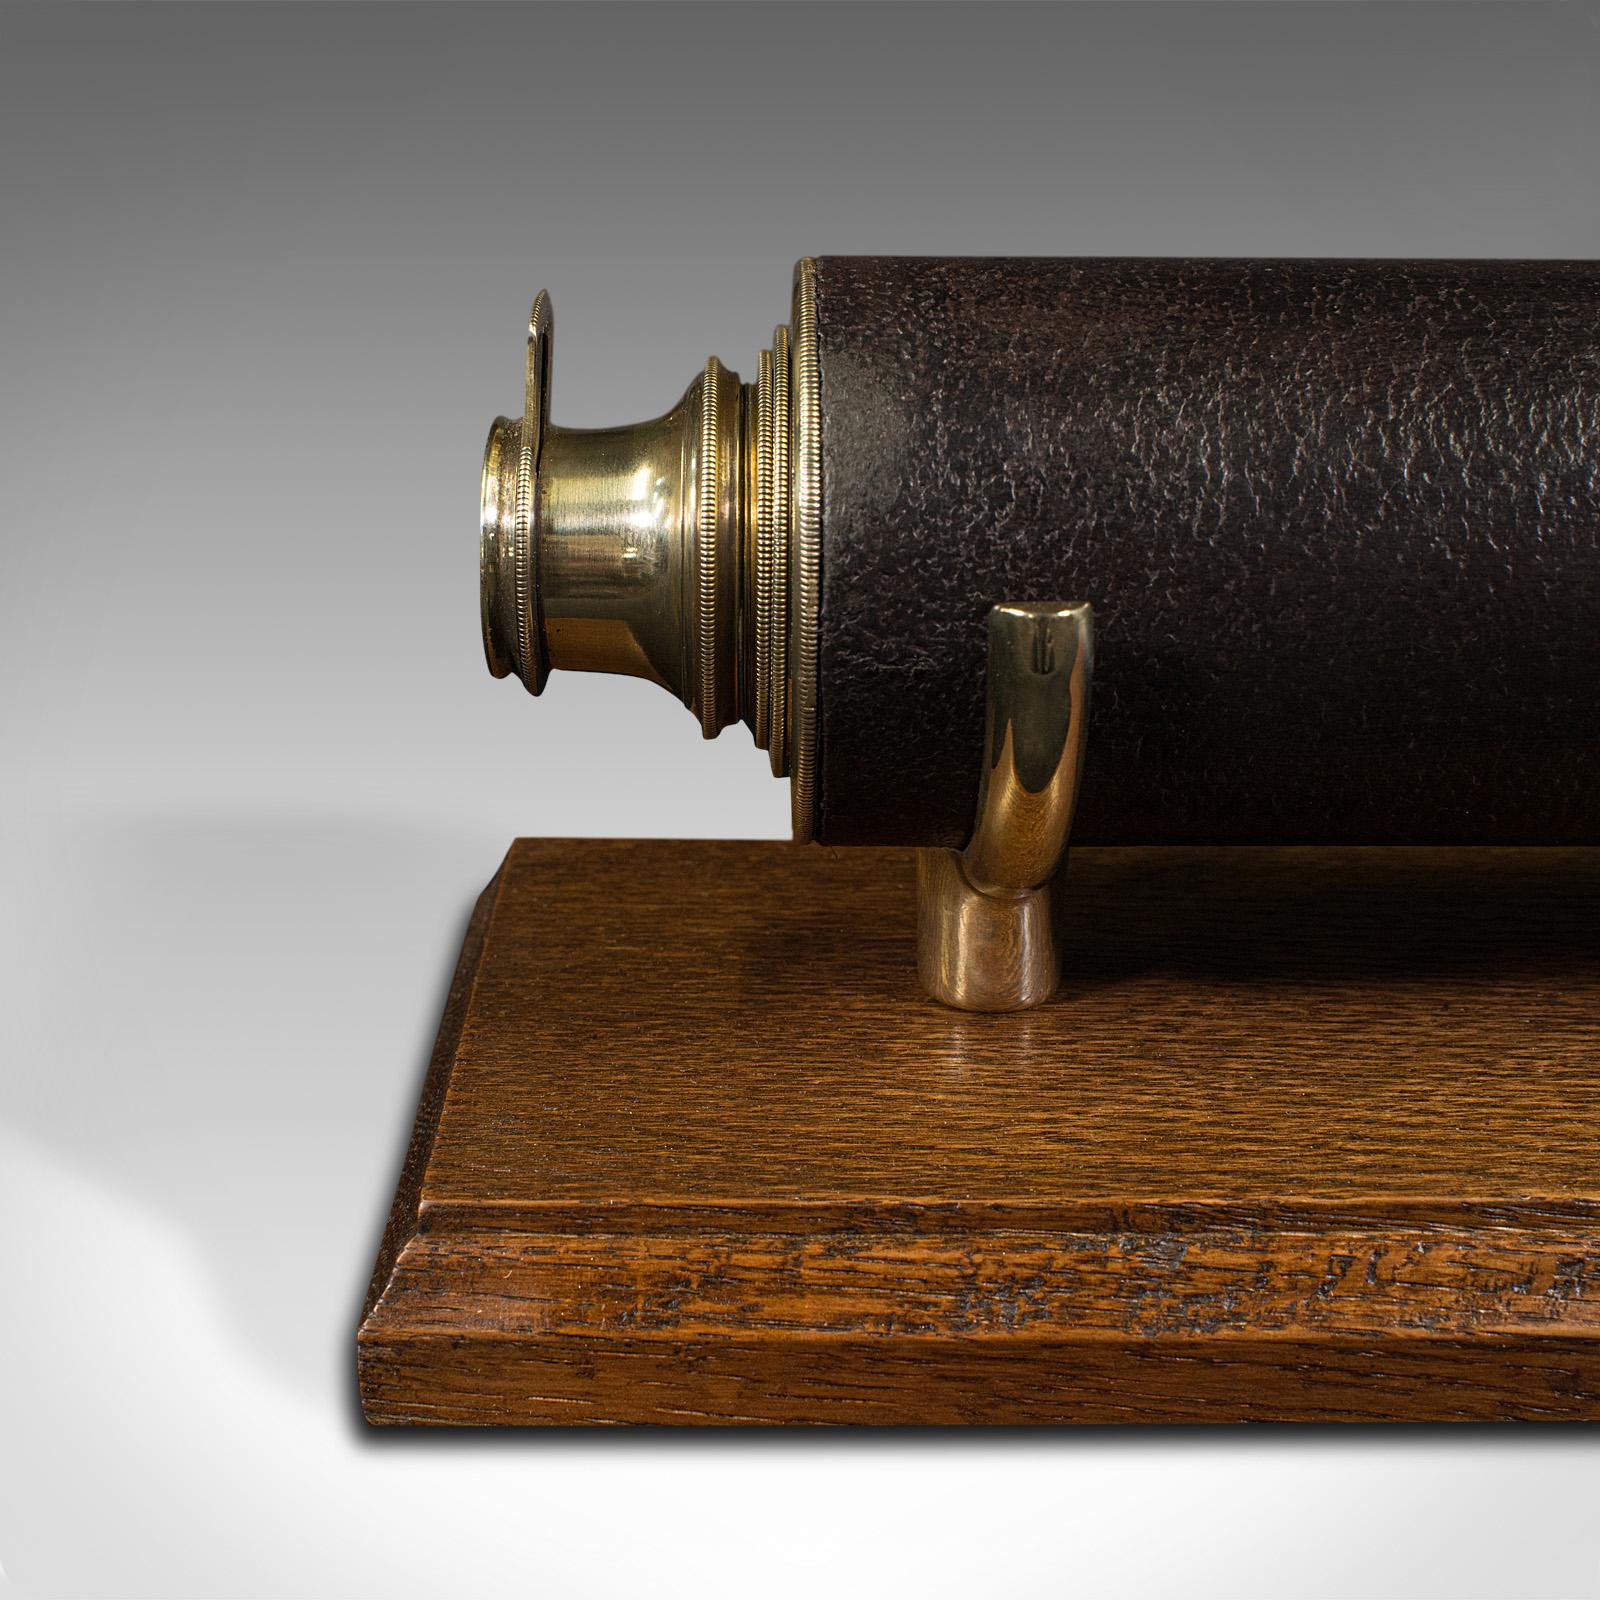 Antique 3 Draw Telescope, English, Brass, Leather, Terrestrial, Victorian, 1870 For Sale 4